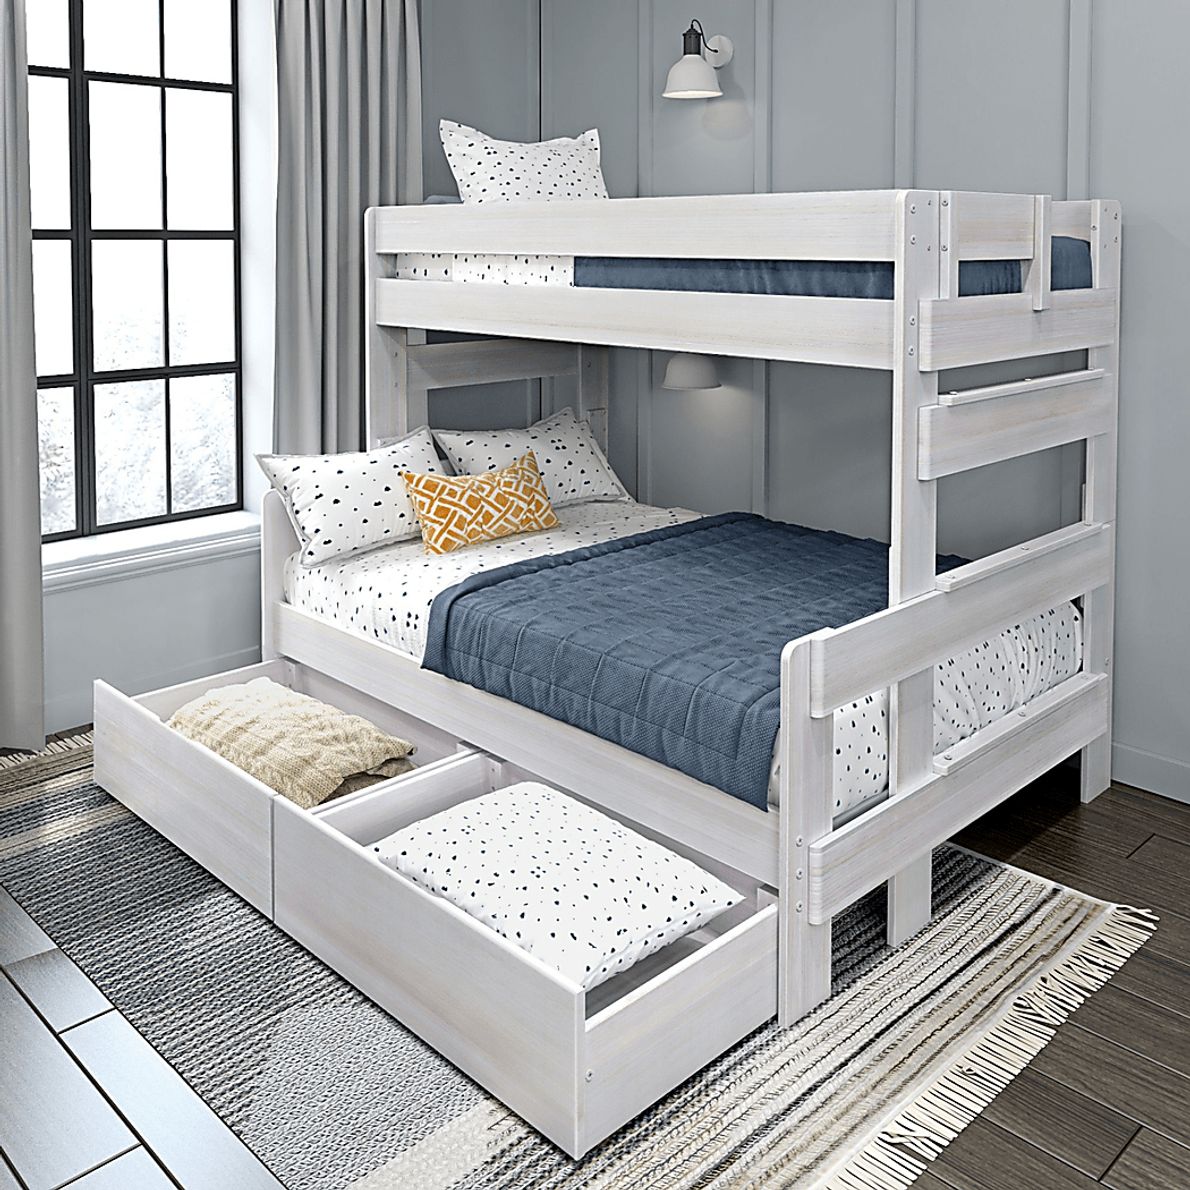 Kids Eastwick White Twin/Full Bunk Bed with Storage Drawers